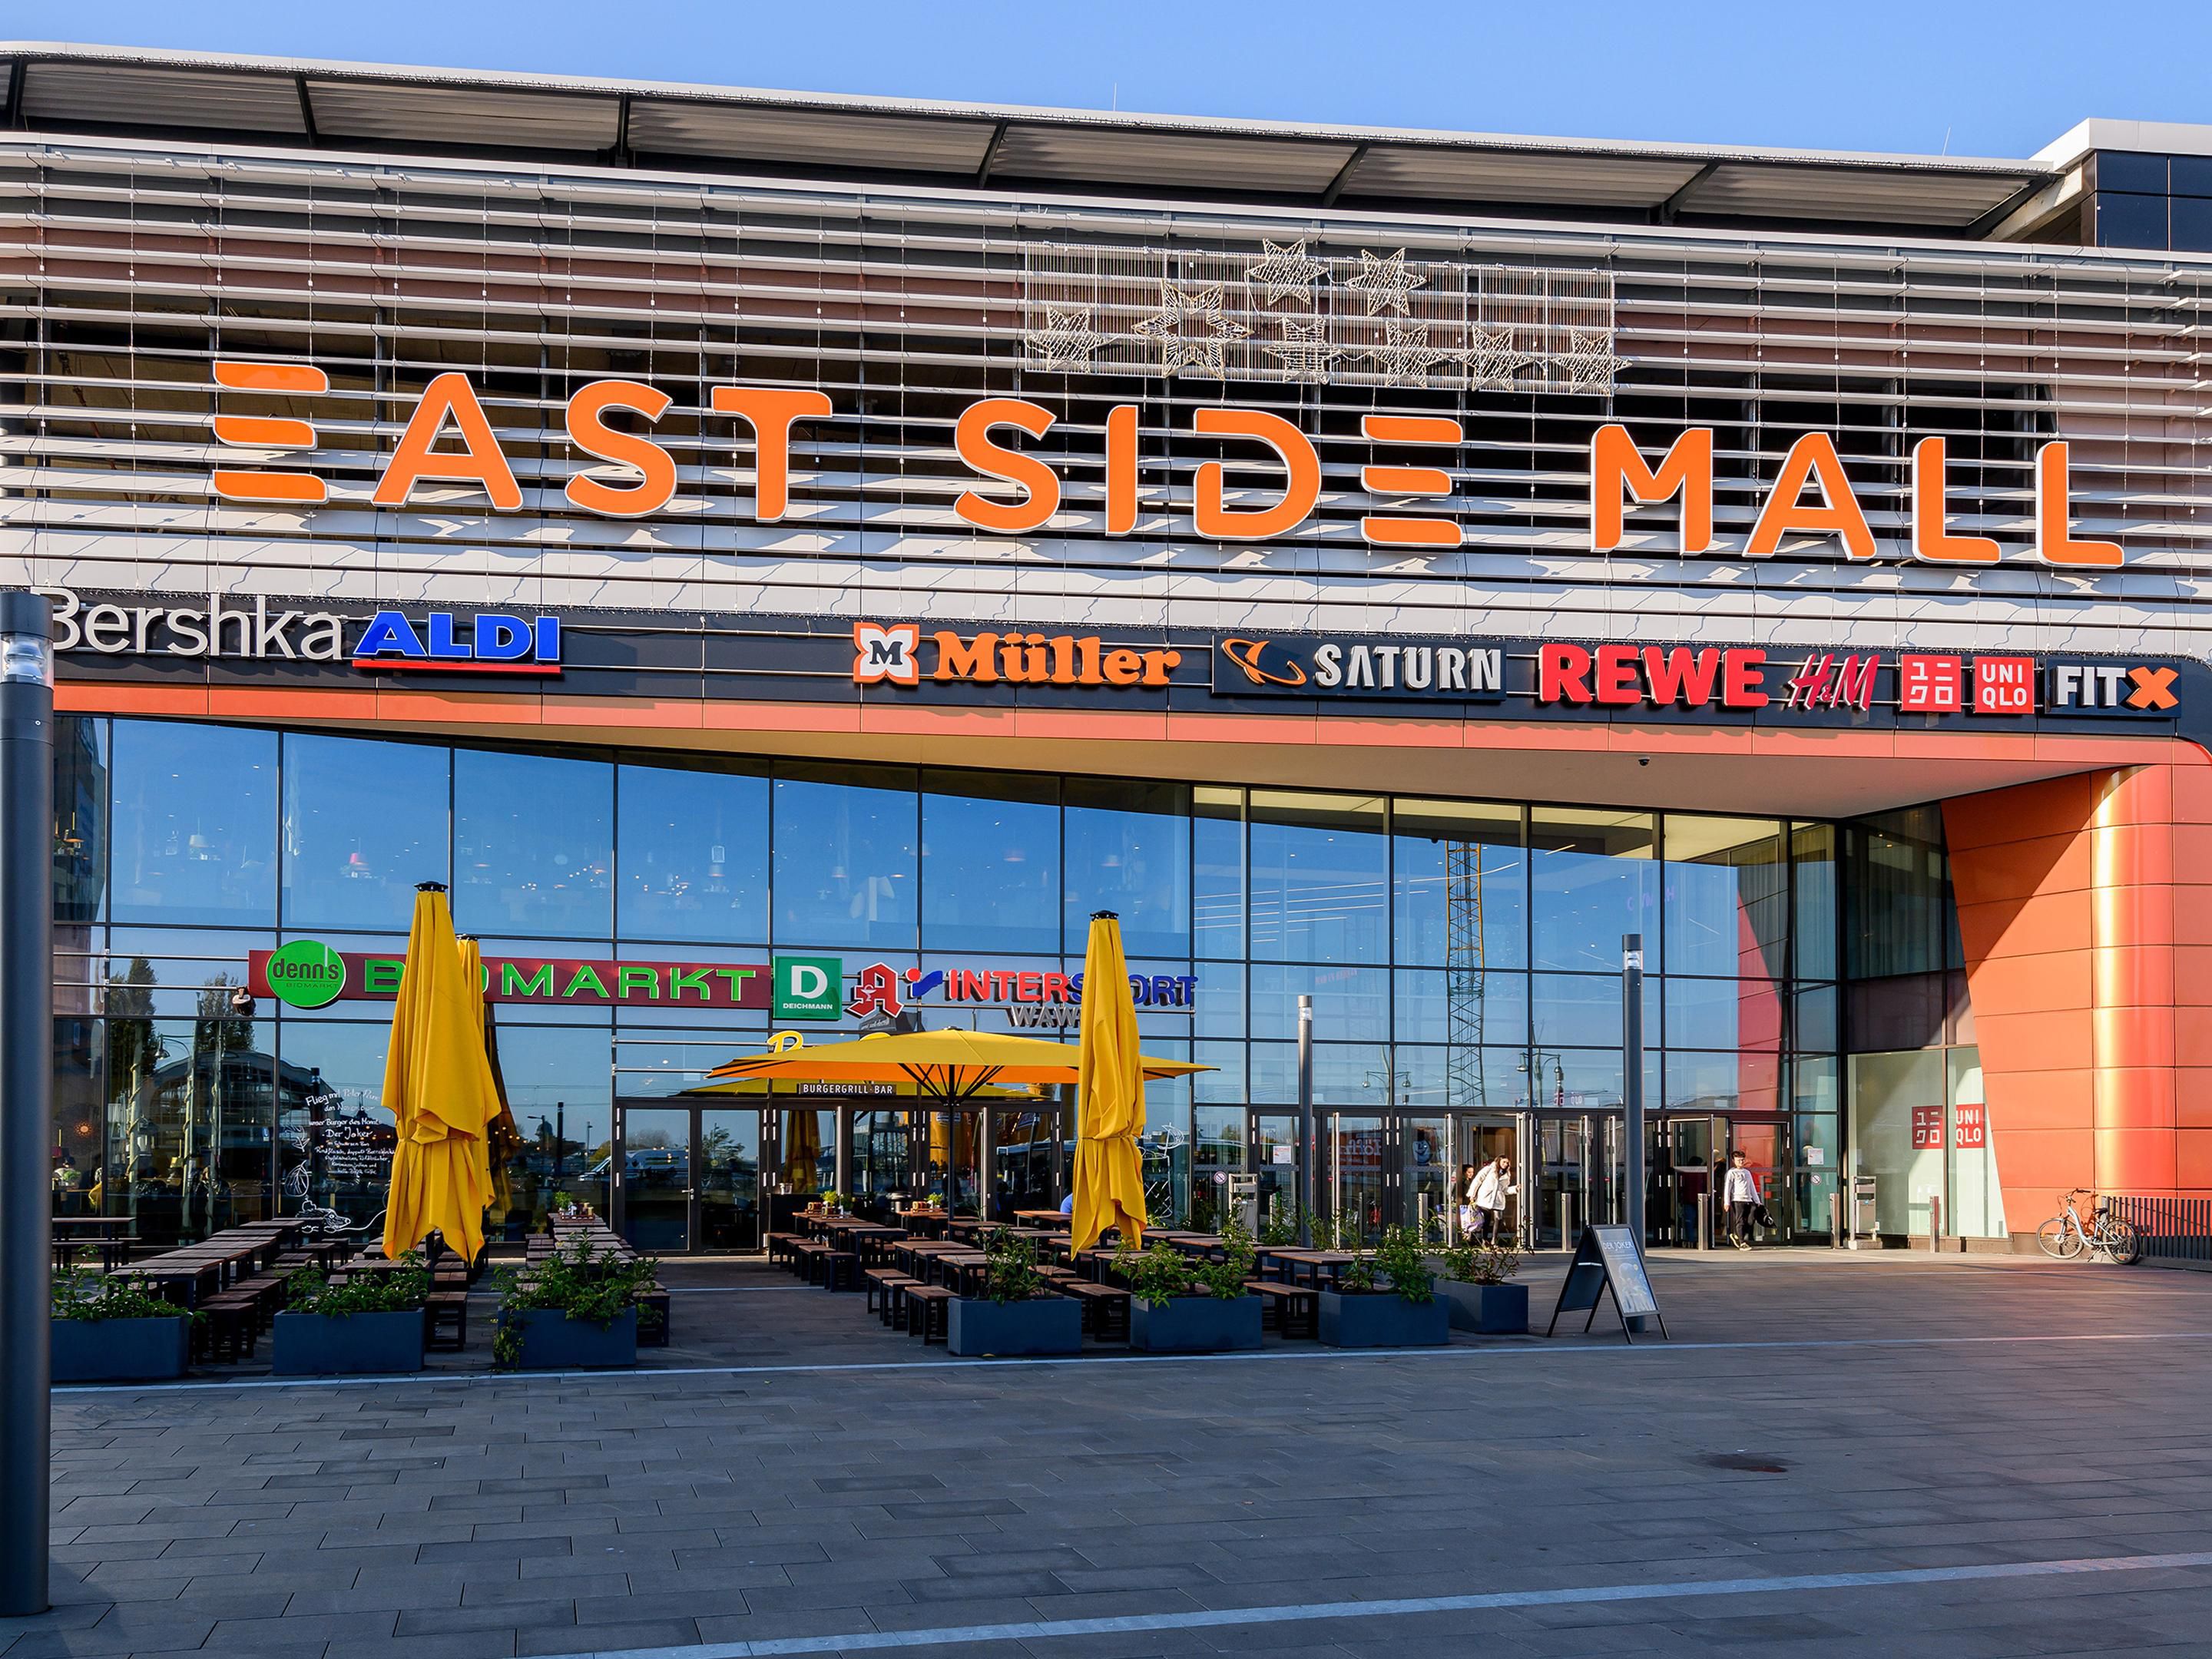 The East Side Mall is a shopping mall just 300 metres from the hotel. The mall was designed by architect Ben van Berkel. Construction began in May 2016 and the mall has been open to everyone since October 2018. The mall features every major brand and has a big food court with an outside terrace.